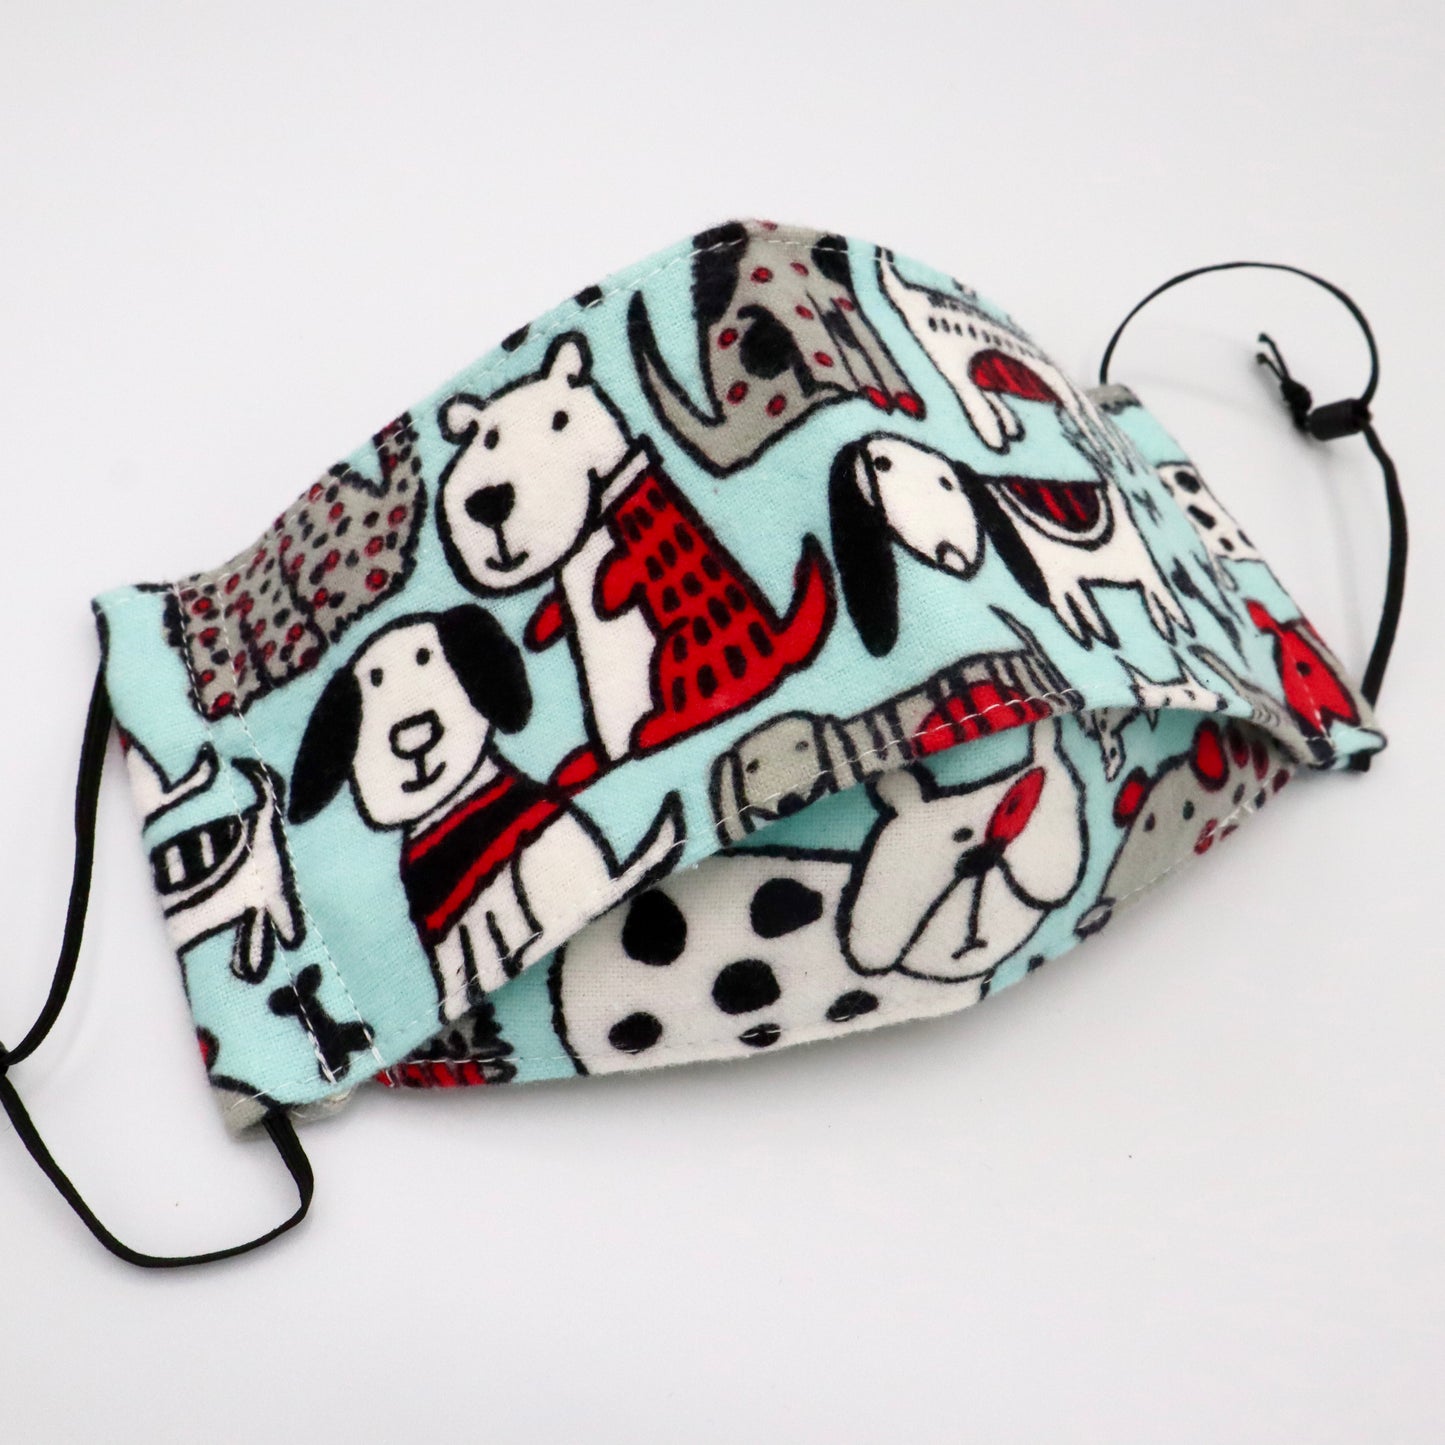 Doodle Dogs | 3D Face Mask with Nose Wire, Adjustable Ear Loops, and Optional Filter Pocket